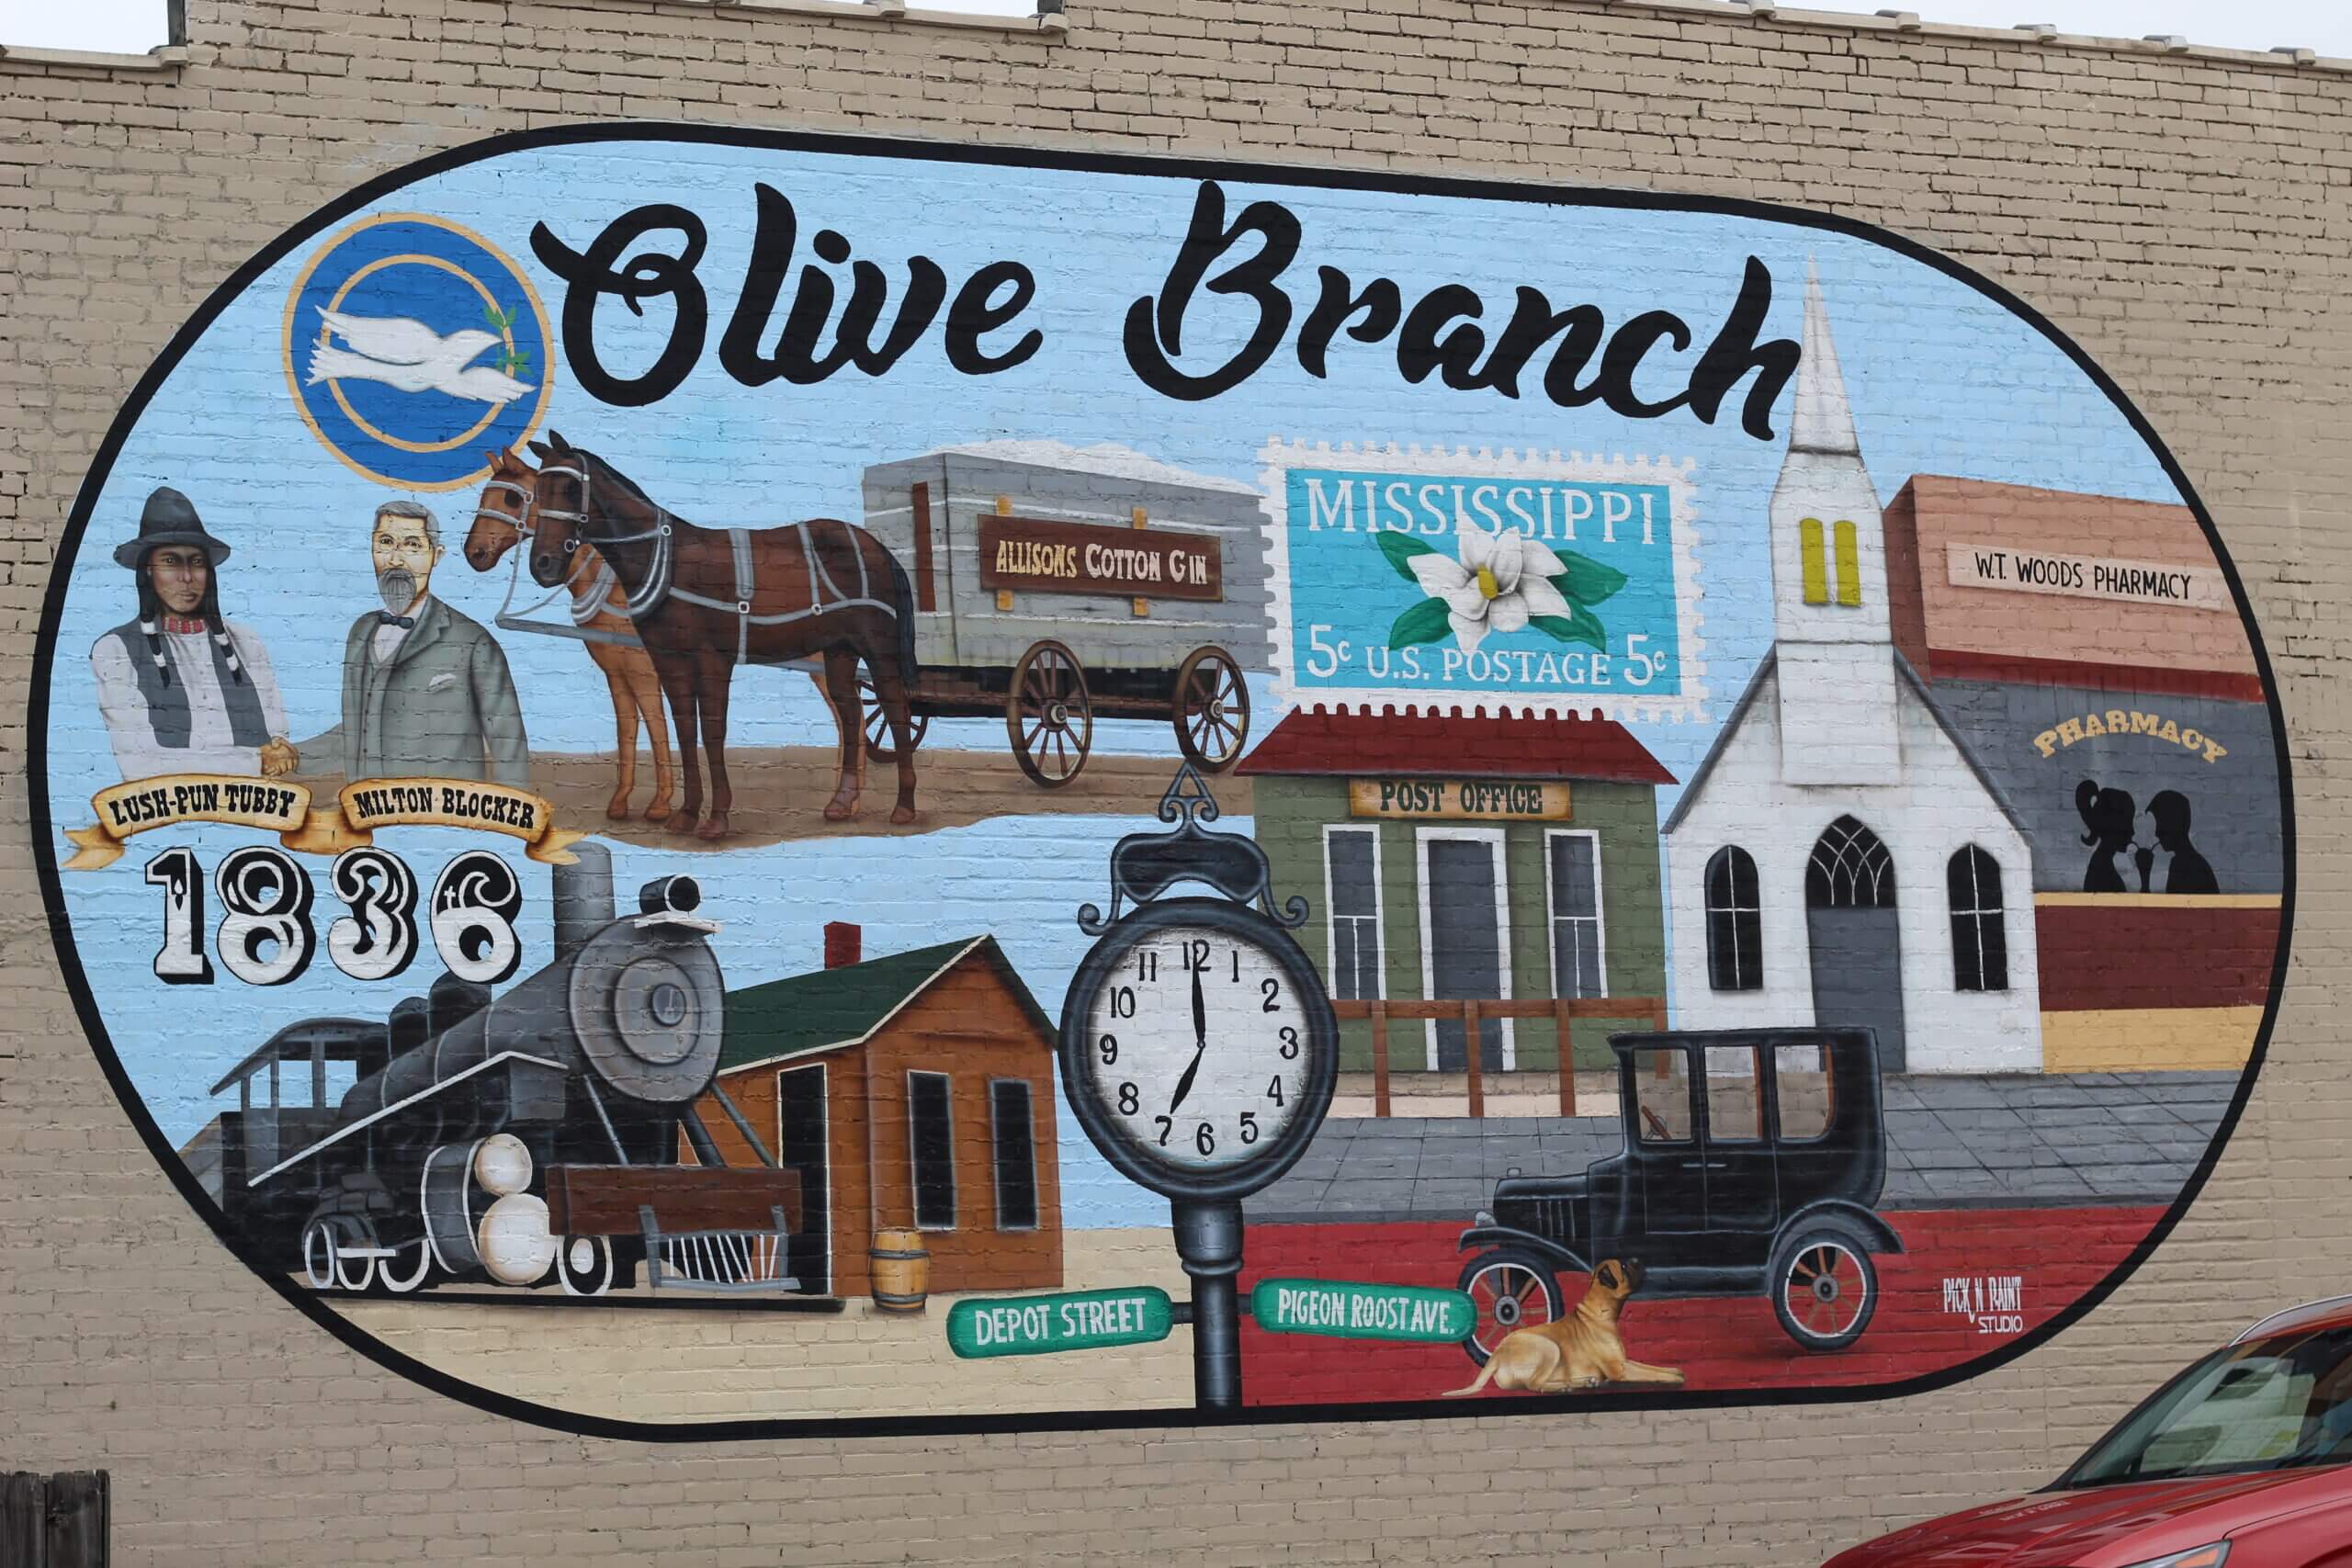 Olive Branch ranks high in safe city ranking